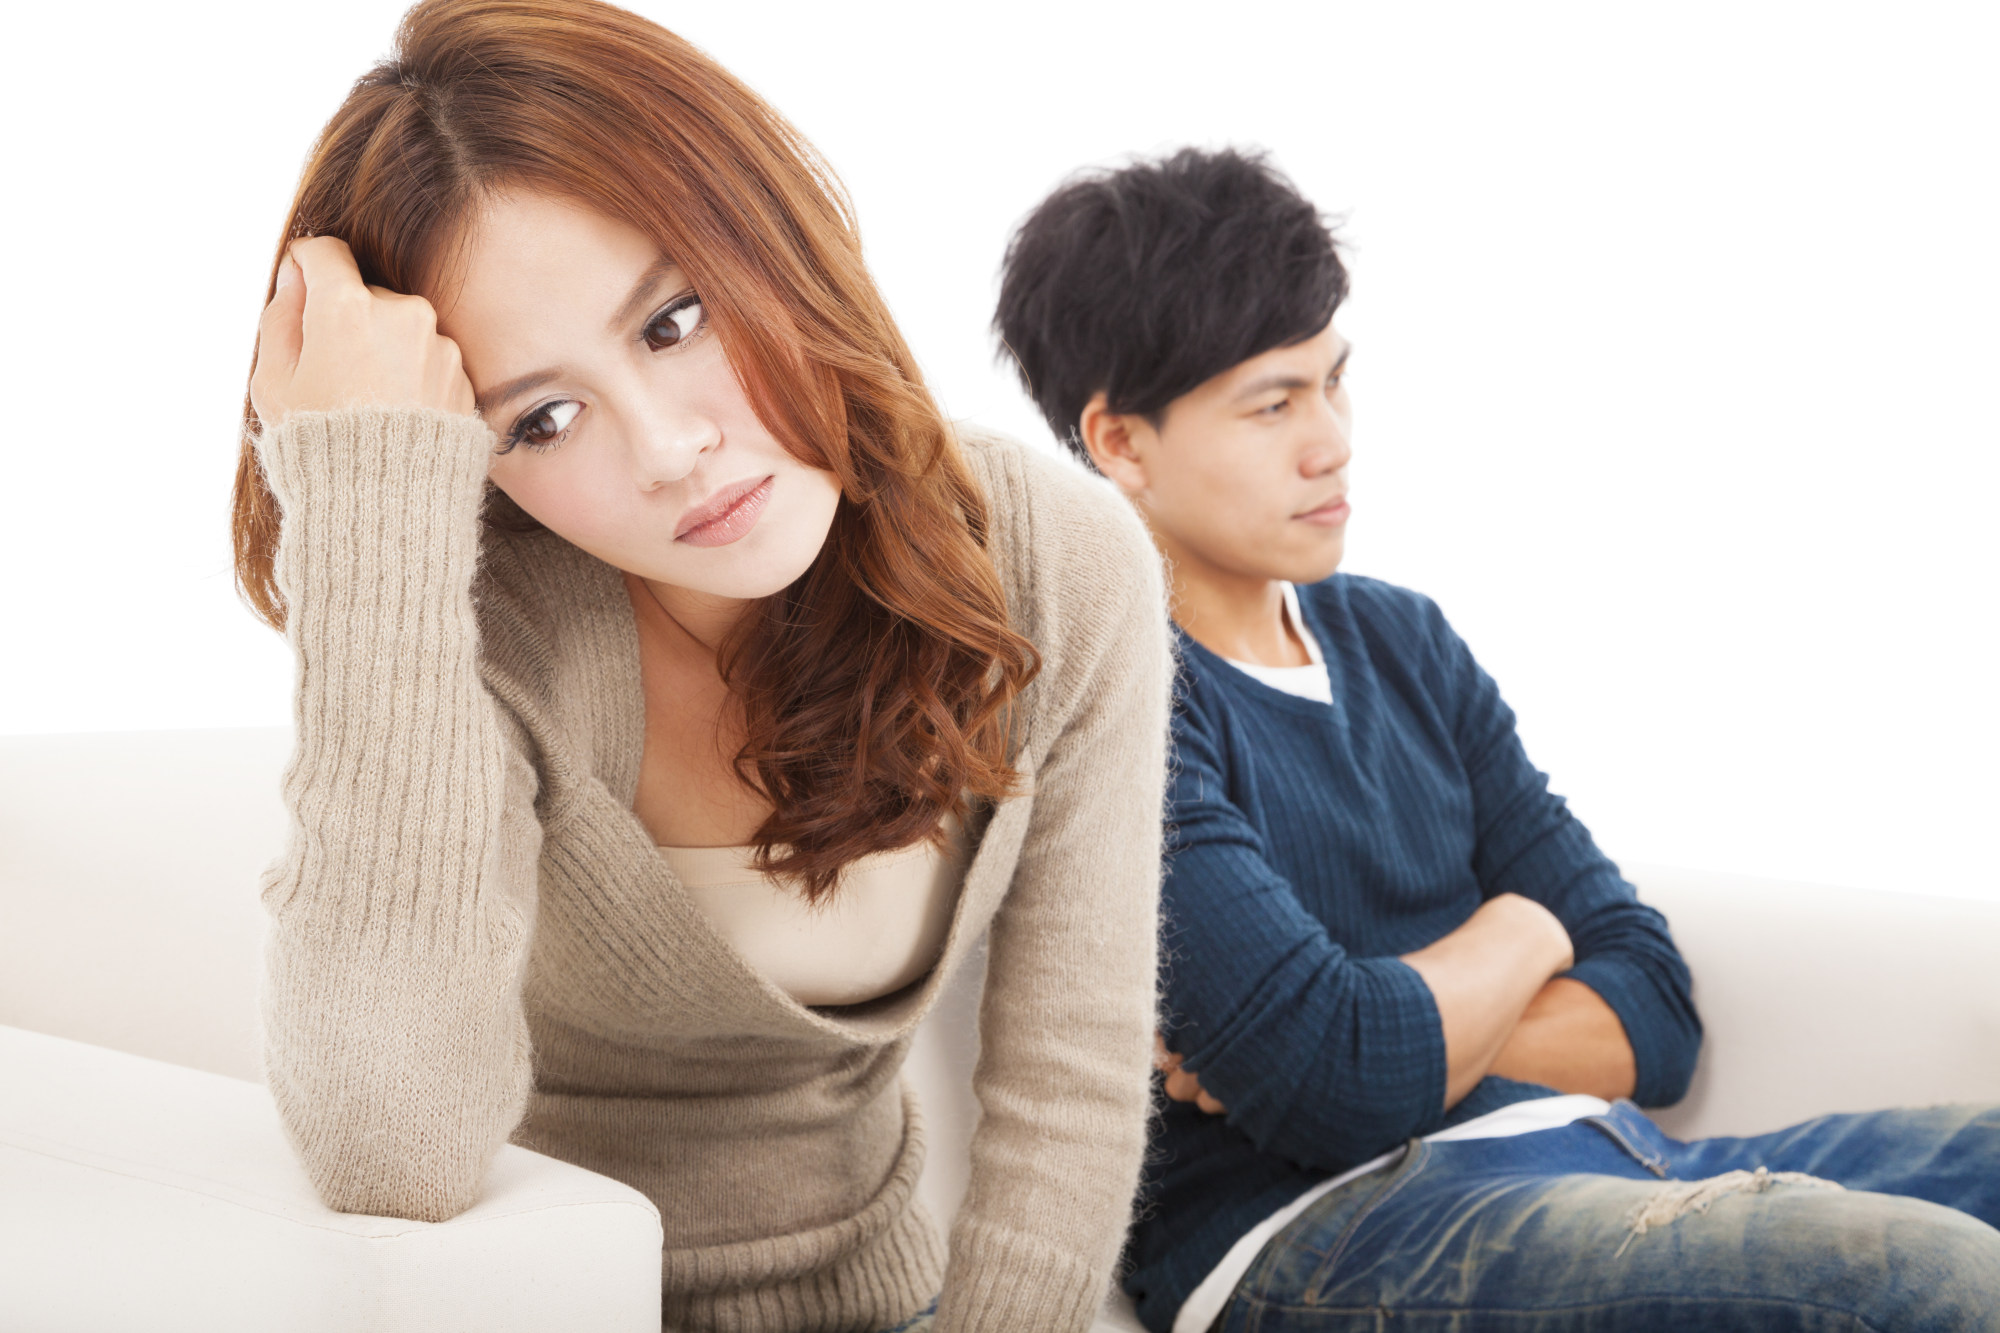 Stories about unhappy break-ups often trend online in China where they find a large audience on social media. Photo: Shutterstock